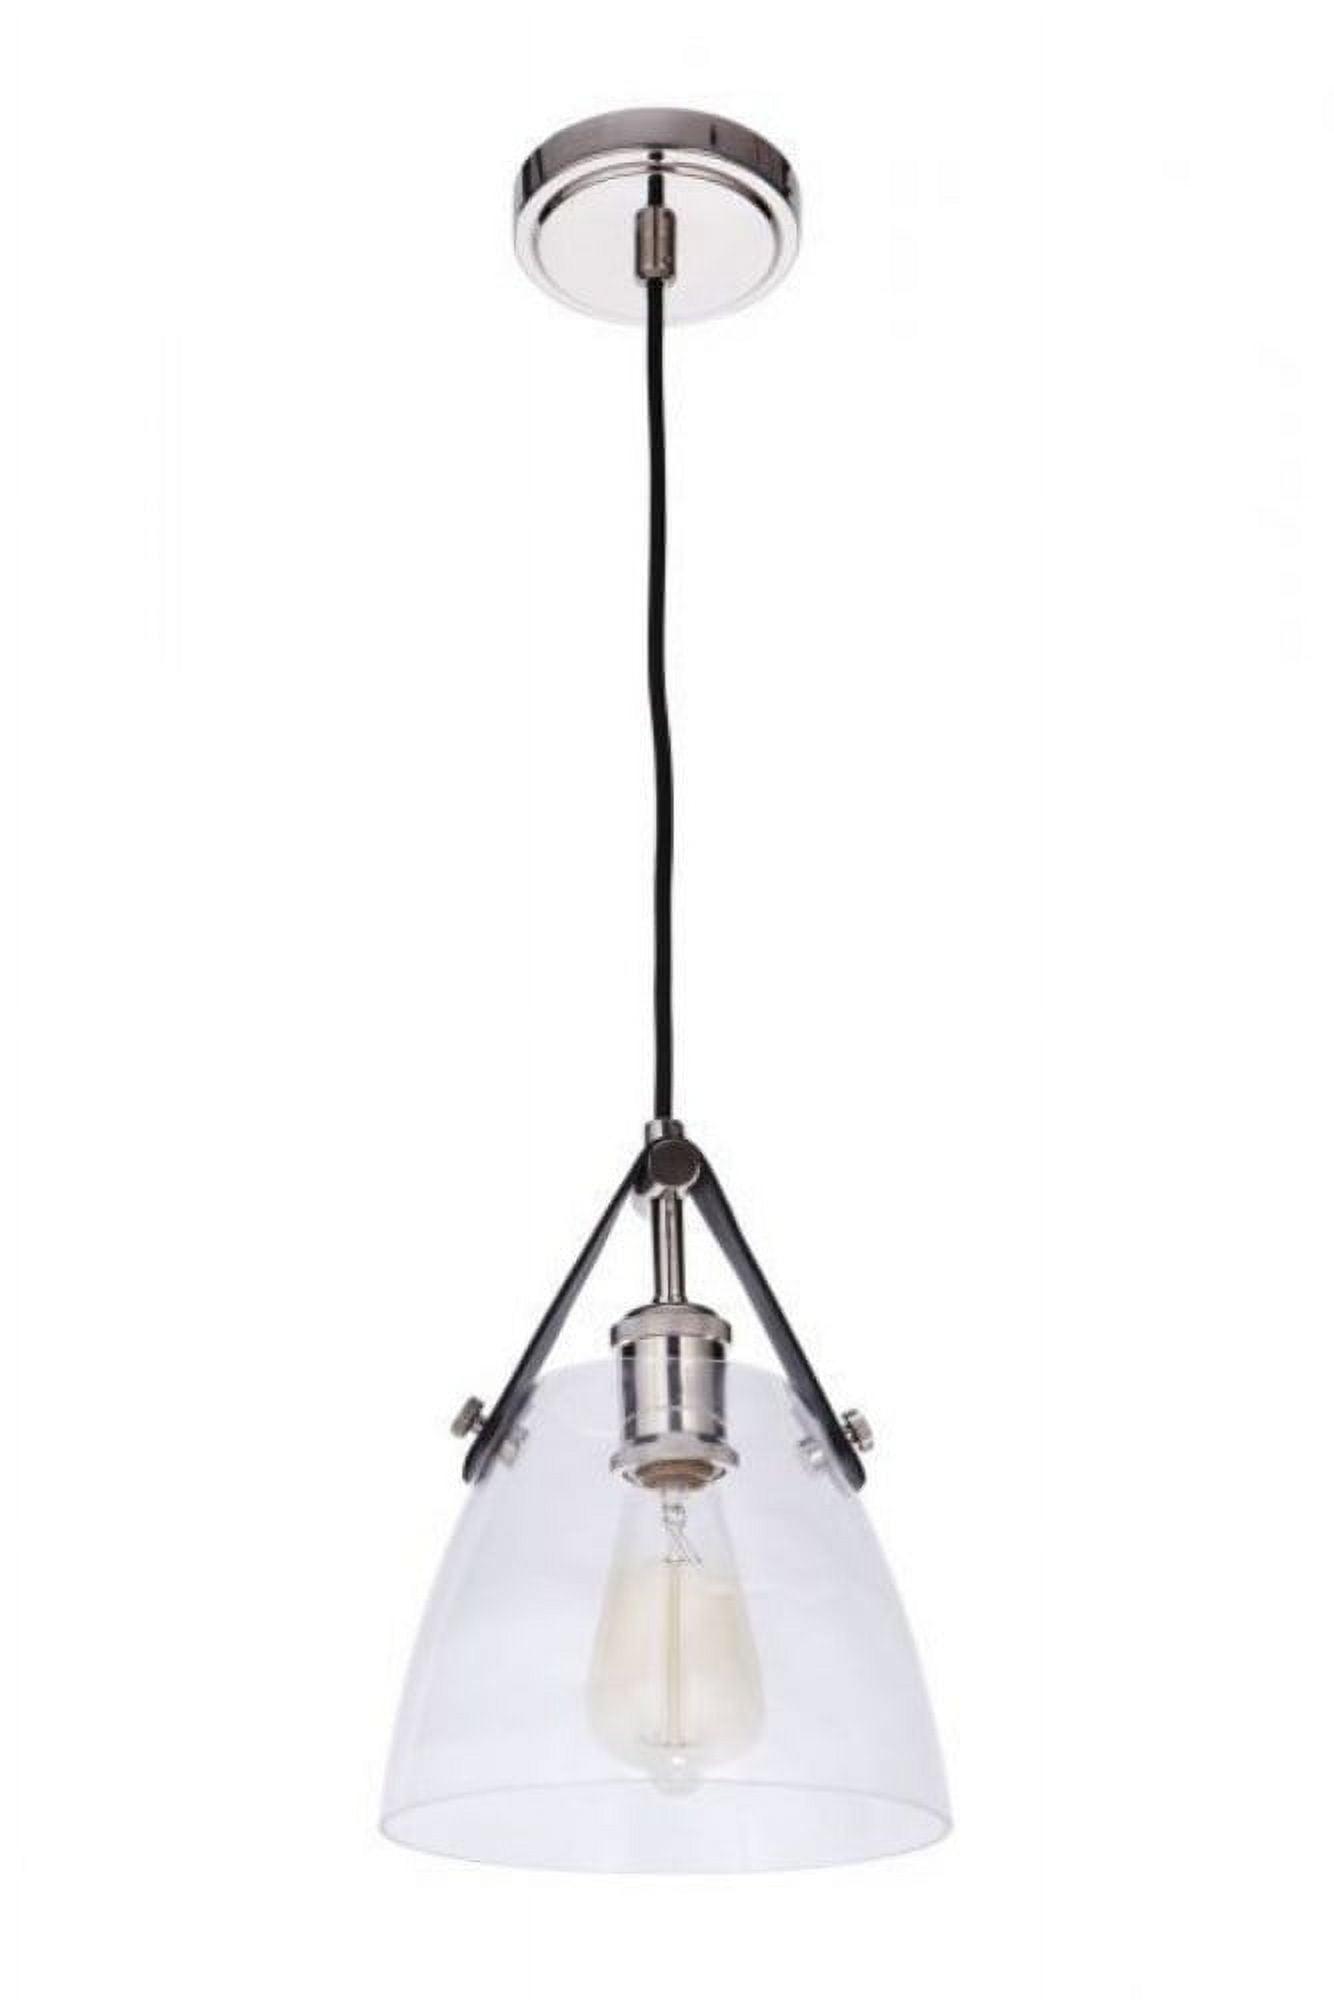 Hagen 7.87" Polished Nickel Modern Pendant with Clear Glass Dome